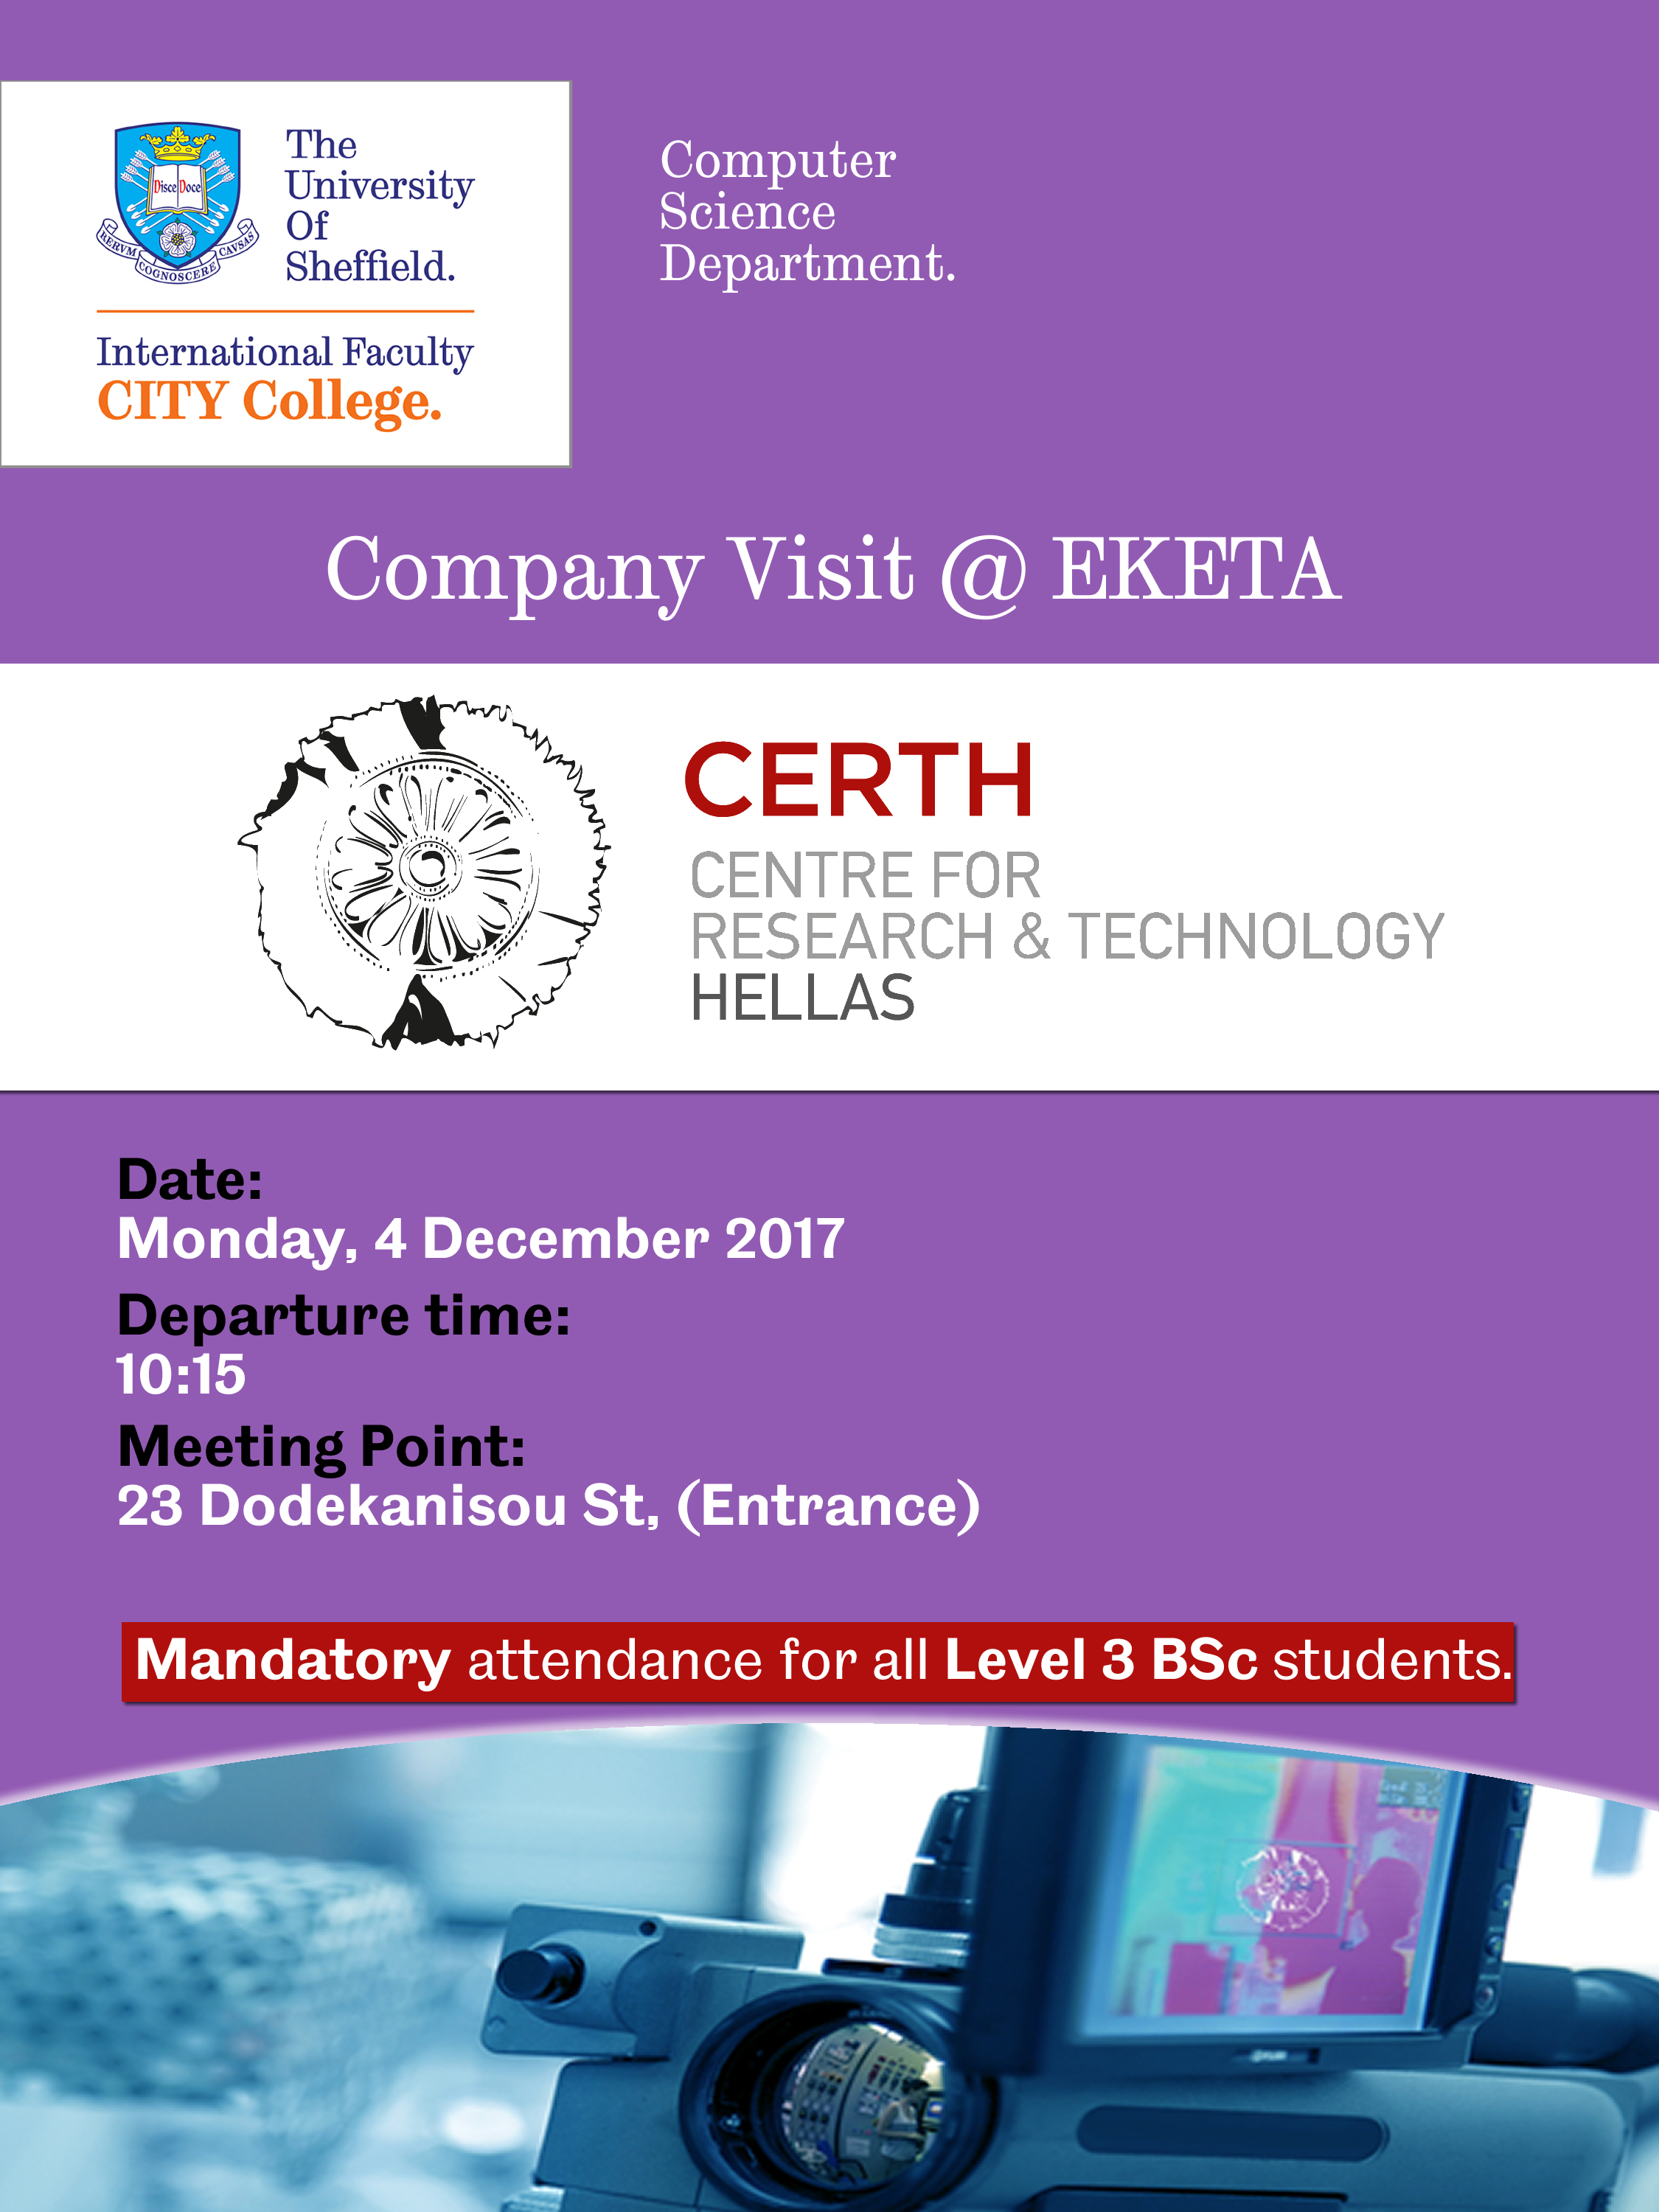 Company Visit to EKETA by the International Faculty CITY College Computer Science students